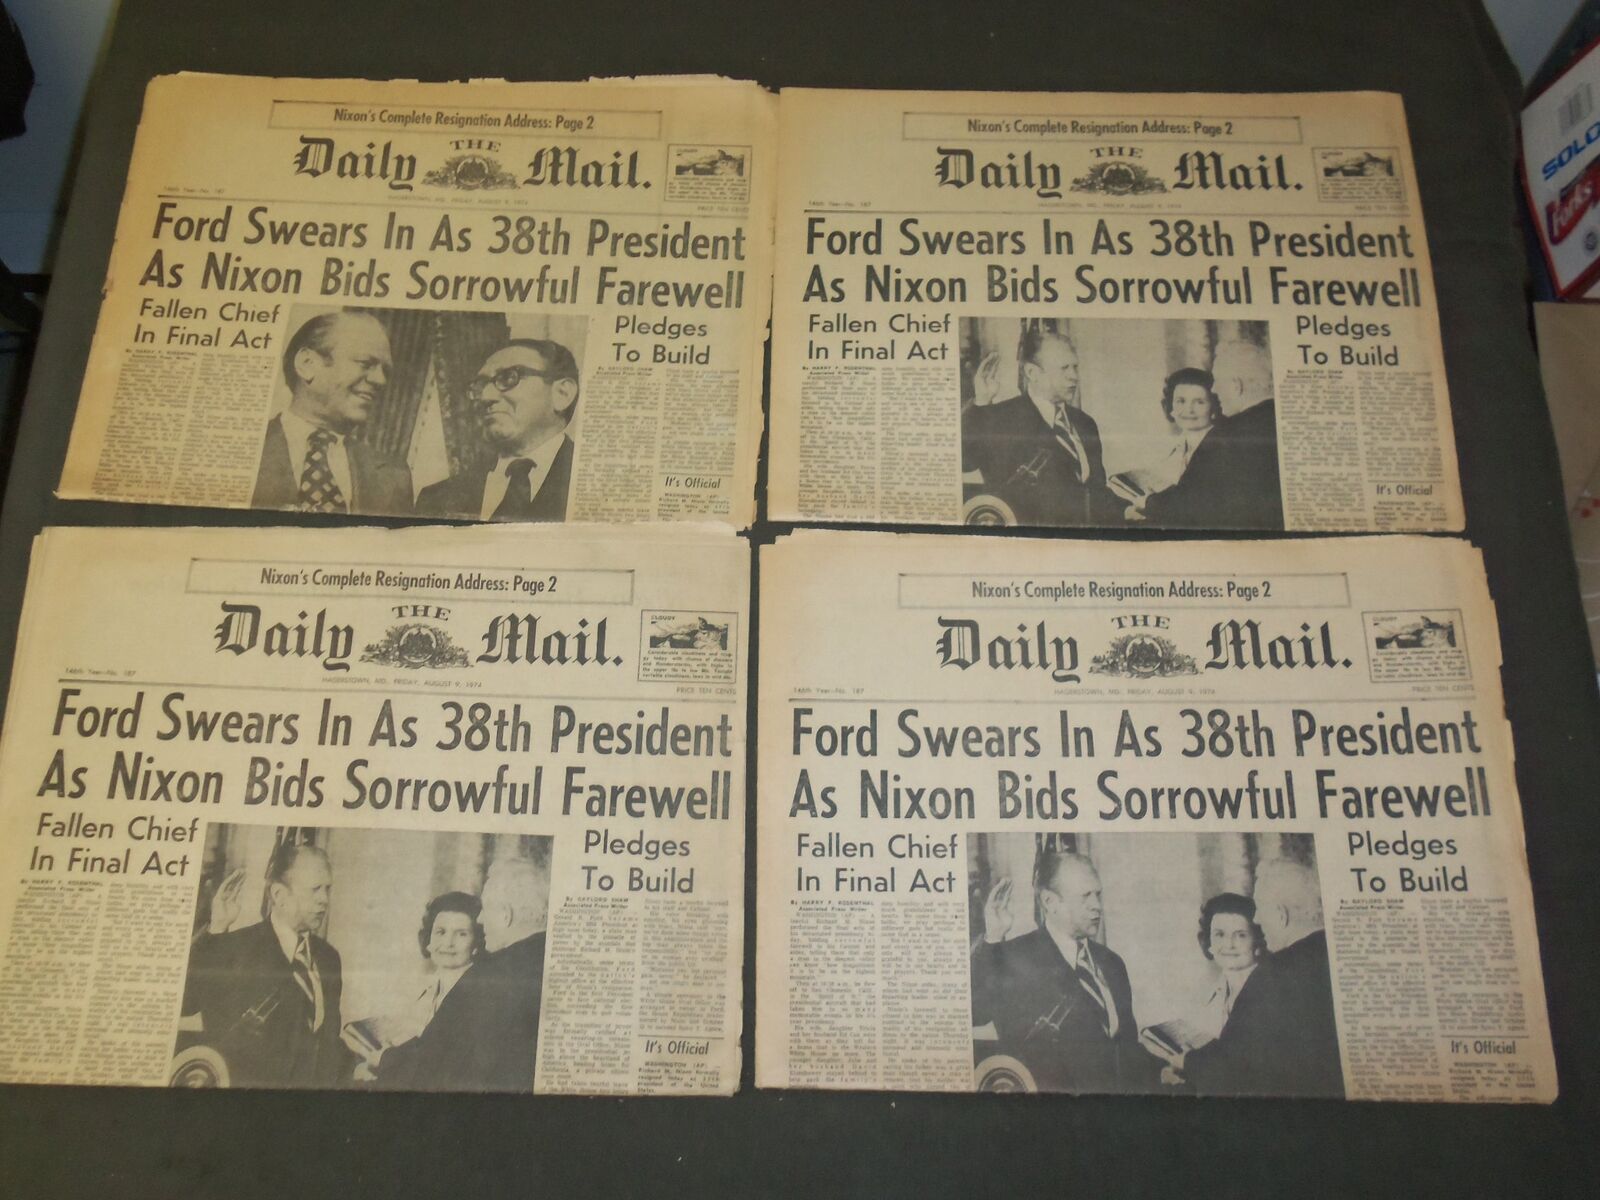 1974 AUG 9 THE DAILY MAIL NEWSPAPER- LOT OF 4- GERALD FORD INAUGURATION- NP 3244